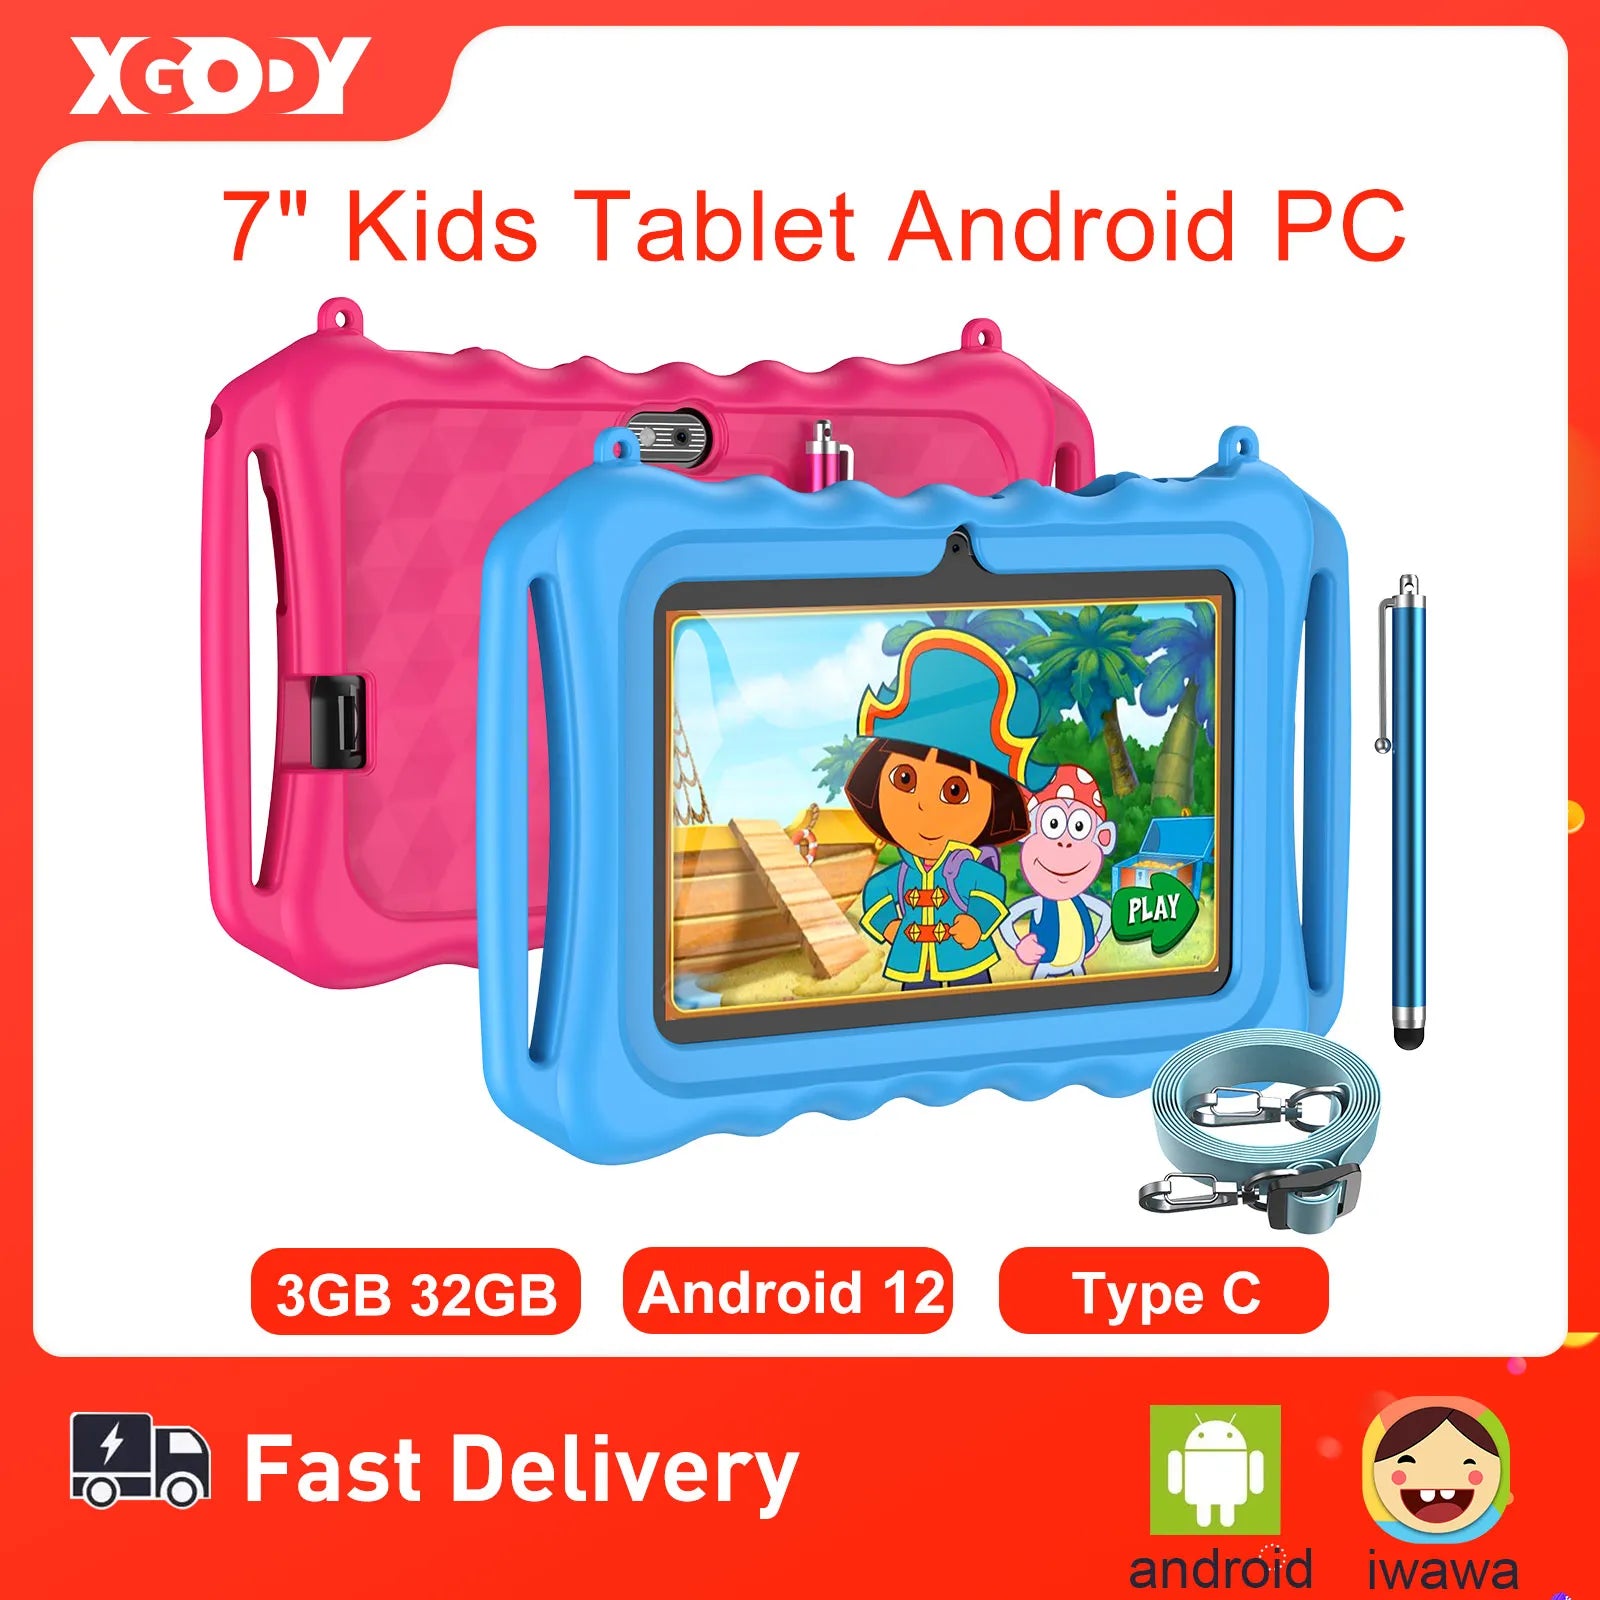 XGODY 7 Inch Kids Tablet Android PC Tablets For Children Study Education Bluetooth WiFi TypeC With Cute Protective Case Kid Gift